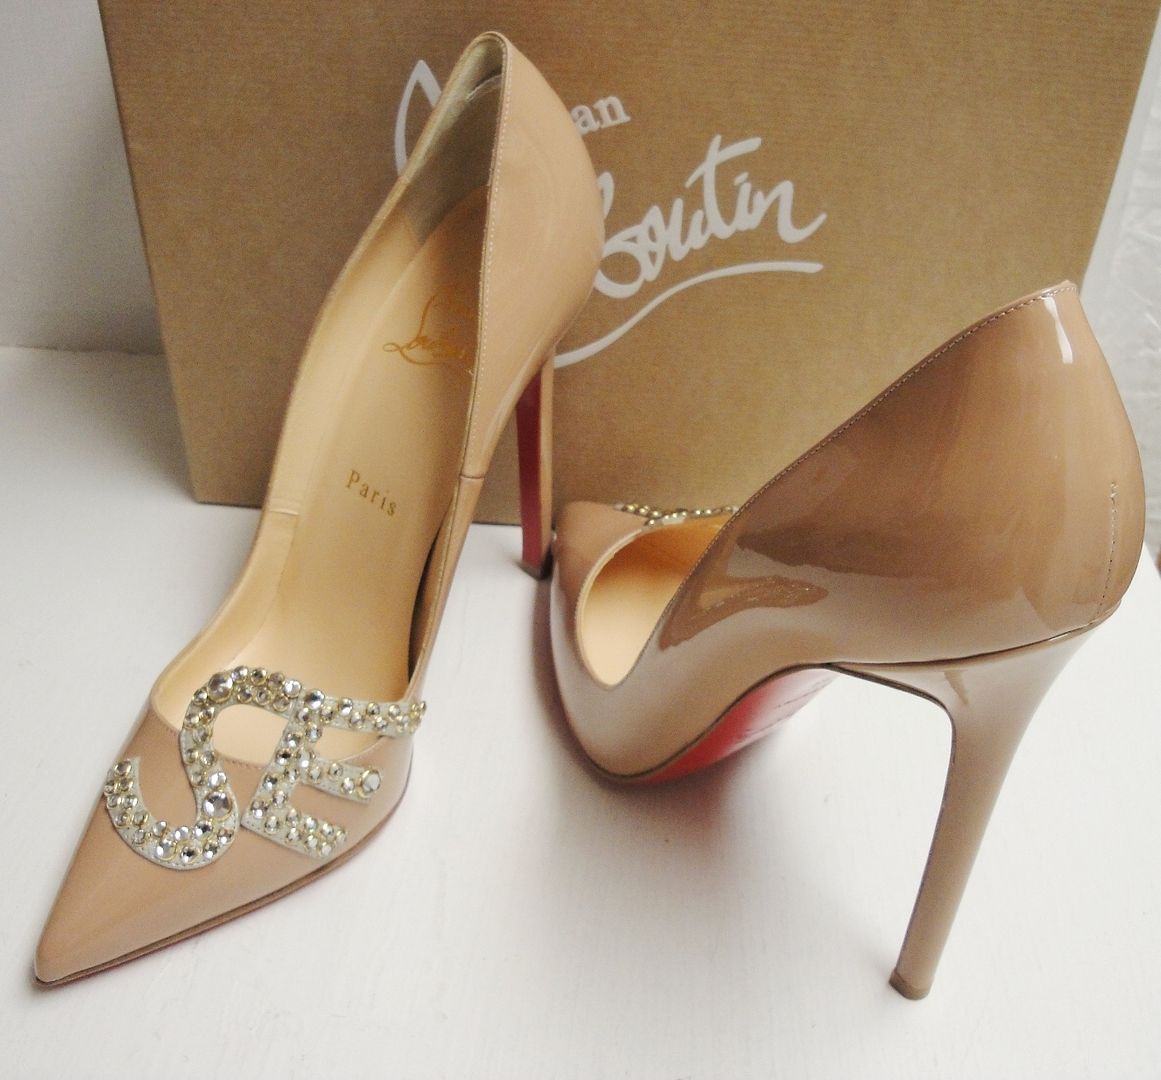 gold christian louboutin shoes - Christian Louboutin Sex Nude Patent 120 Strass Crystals Pumps ...